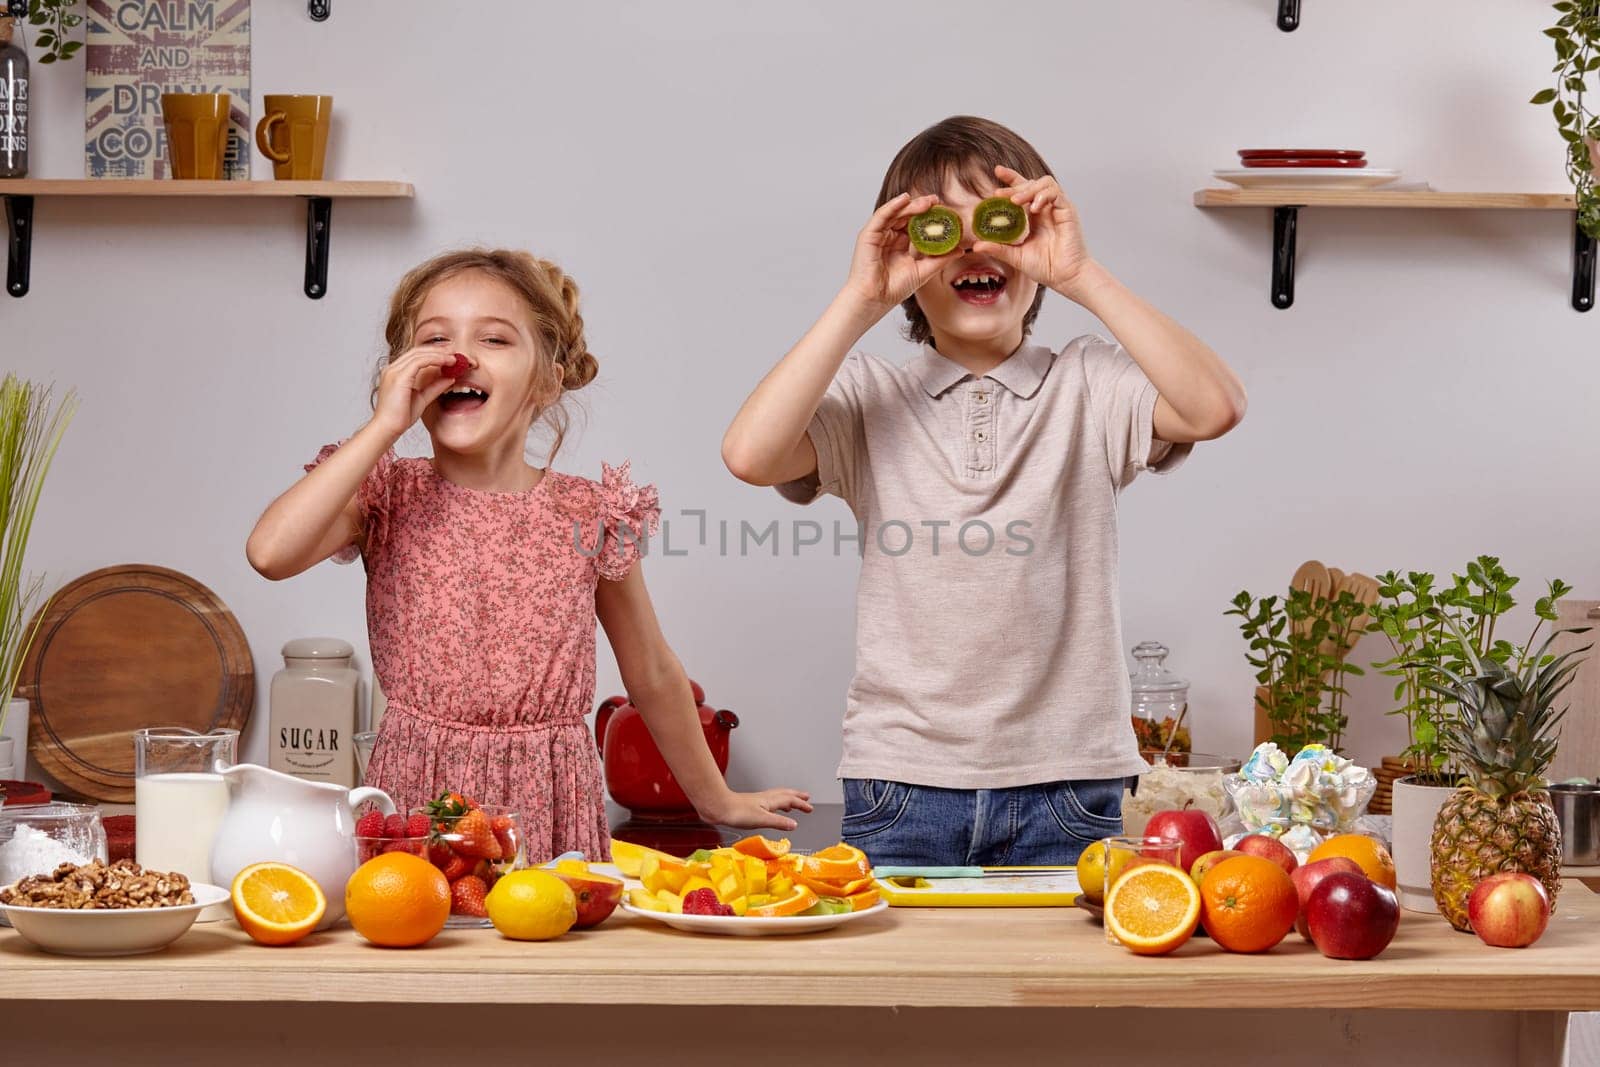 Cute cook couple. Handsome brunette boy dressed in a light t-shirt and jeans with a little blond girl dressed in a pink dress with a braid in her hairstyle are smiling at a kitchen against a white wall with shelves on it. Boy is holding a kiwi as if it were his eyes and girl is holding a strawberry as if it were her nose.